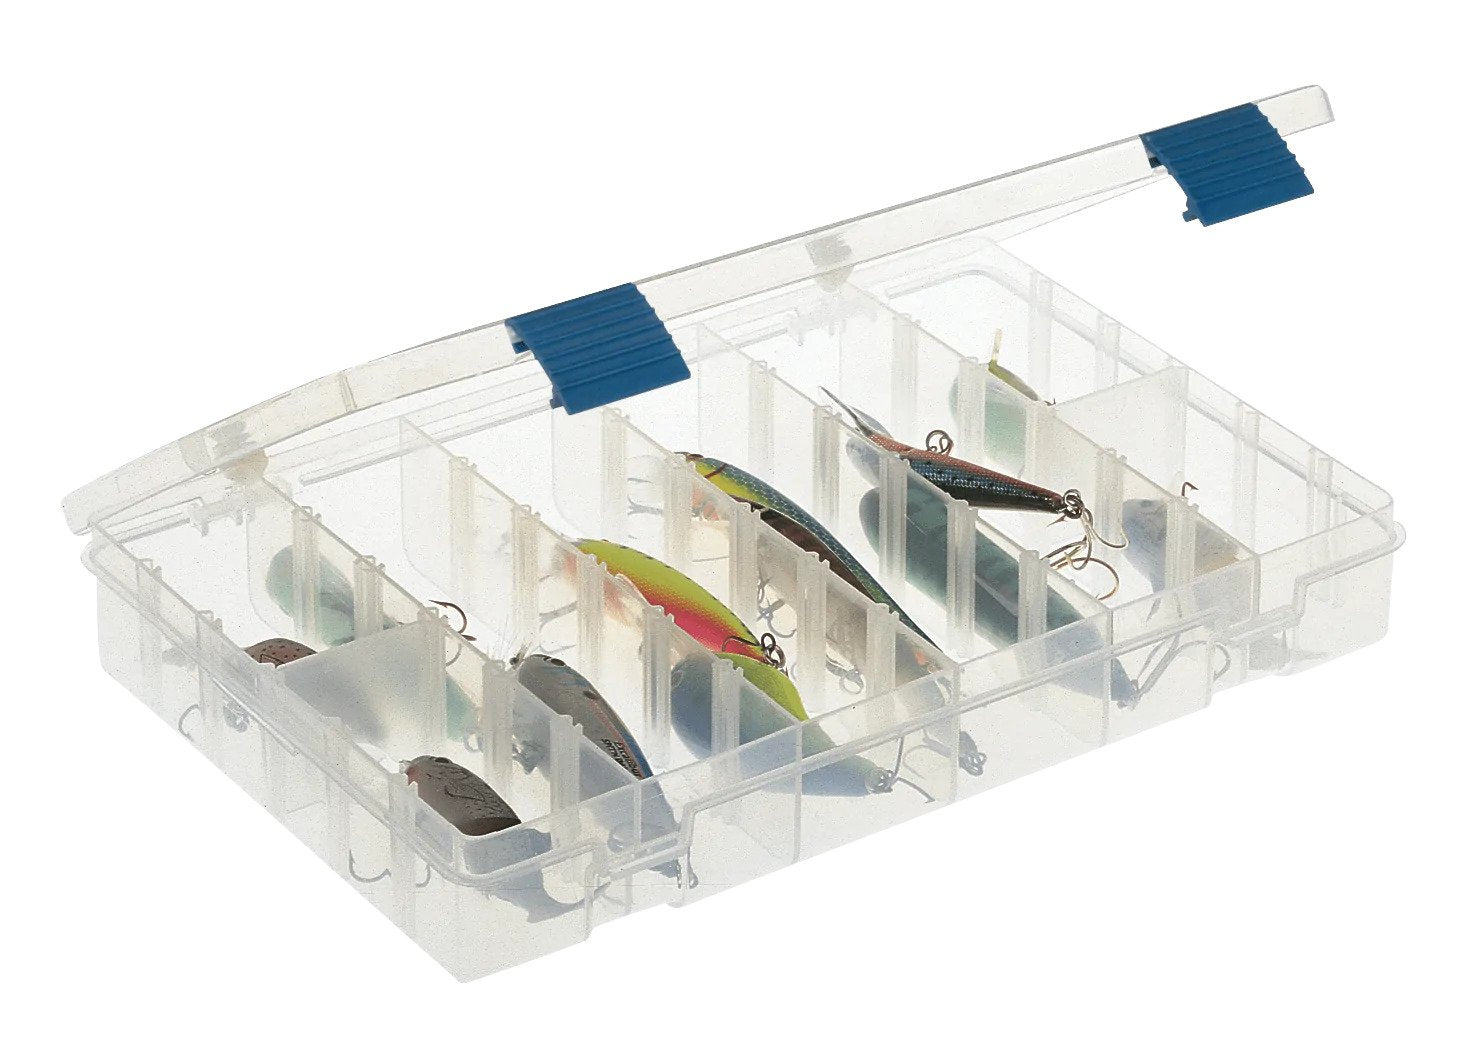 Plano ProLatch Clear Plastic Adjustable Stowaway Tackle Storage Boxes